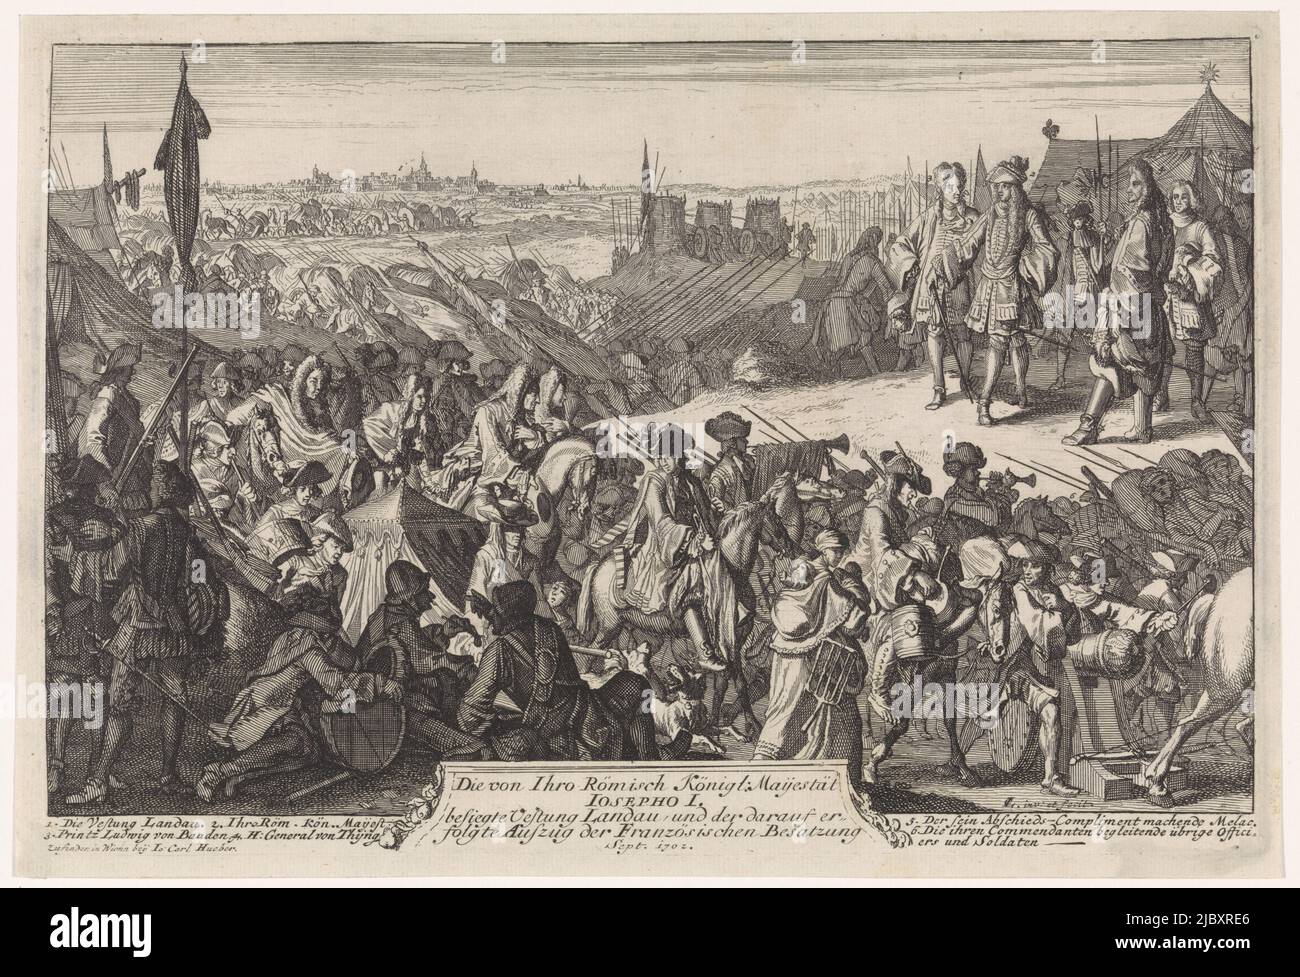 The siege of Landau, captured from the French by imperial troops under Louis William I, Margrave of Baden-Baden, September 10, 1702. On the right, state Joseph I with prince Louis William. In the background, French troops depart from Landau. The print has a German caption with directions, Capture of Landau, 1702, print maker: Caspar Luyken, (mentioned on object), Caspar Luyken, (mentioned on object), publisher: I. C. Hueber, (mentioned on object), Vienna, 1702, paper, etching, h 190 mm × w 284 mm Stock Photo